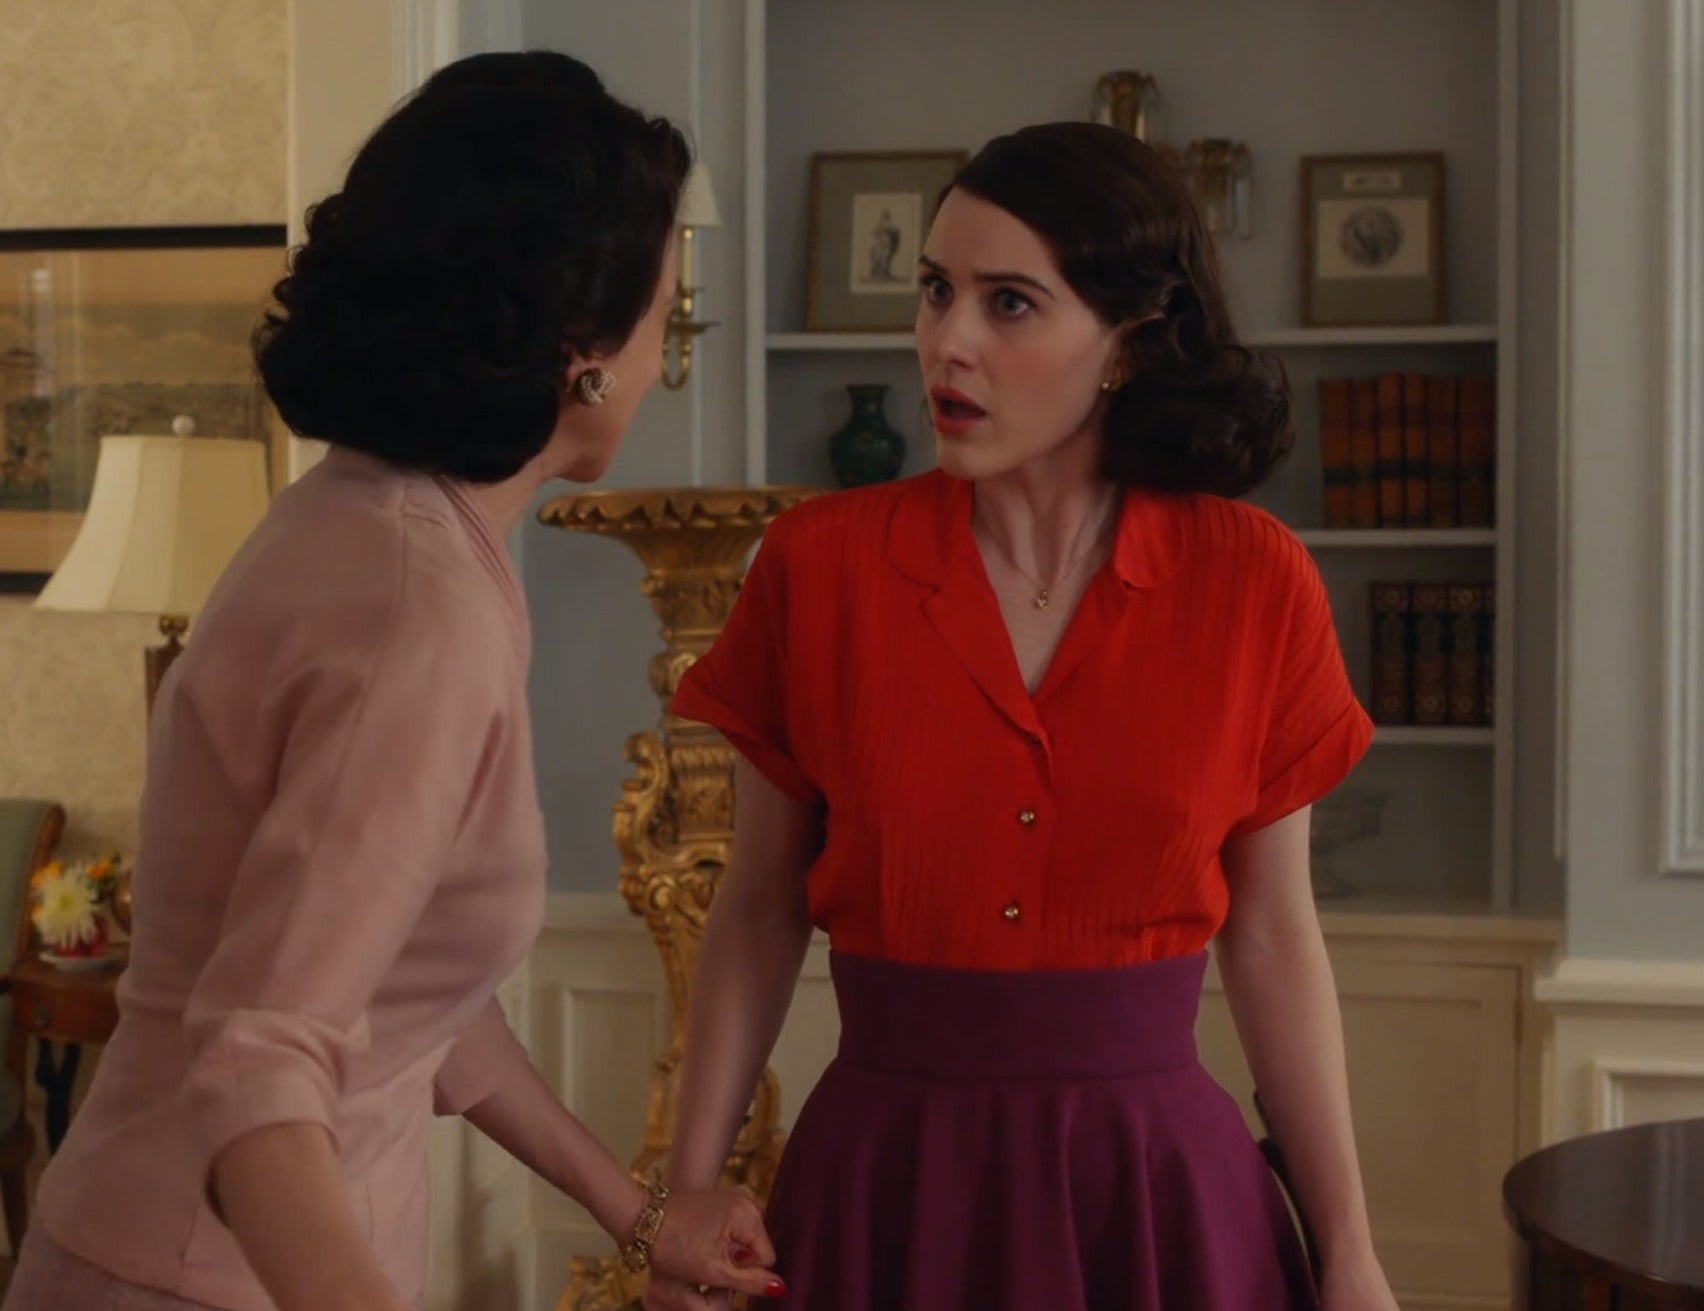 Screenshot from Mrs. Maisel shows Midge in a red top and purple skirt